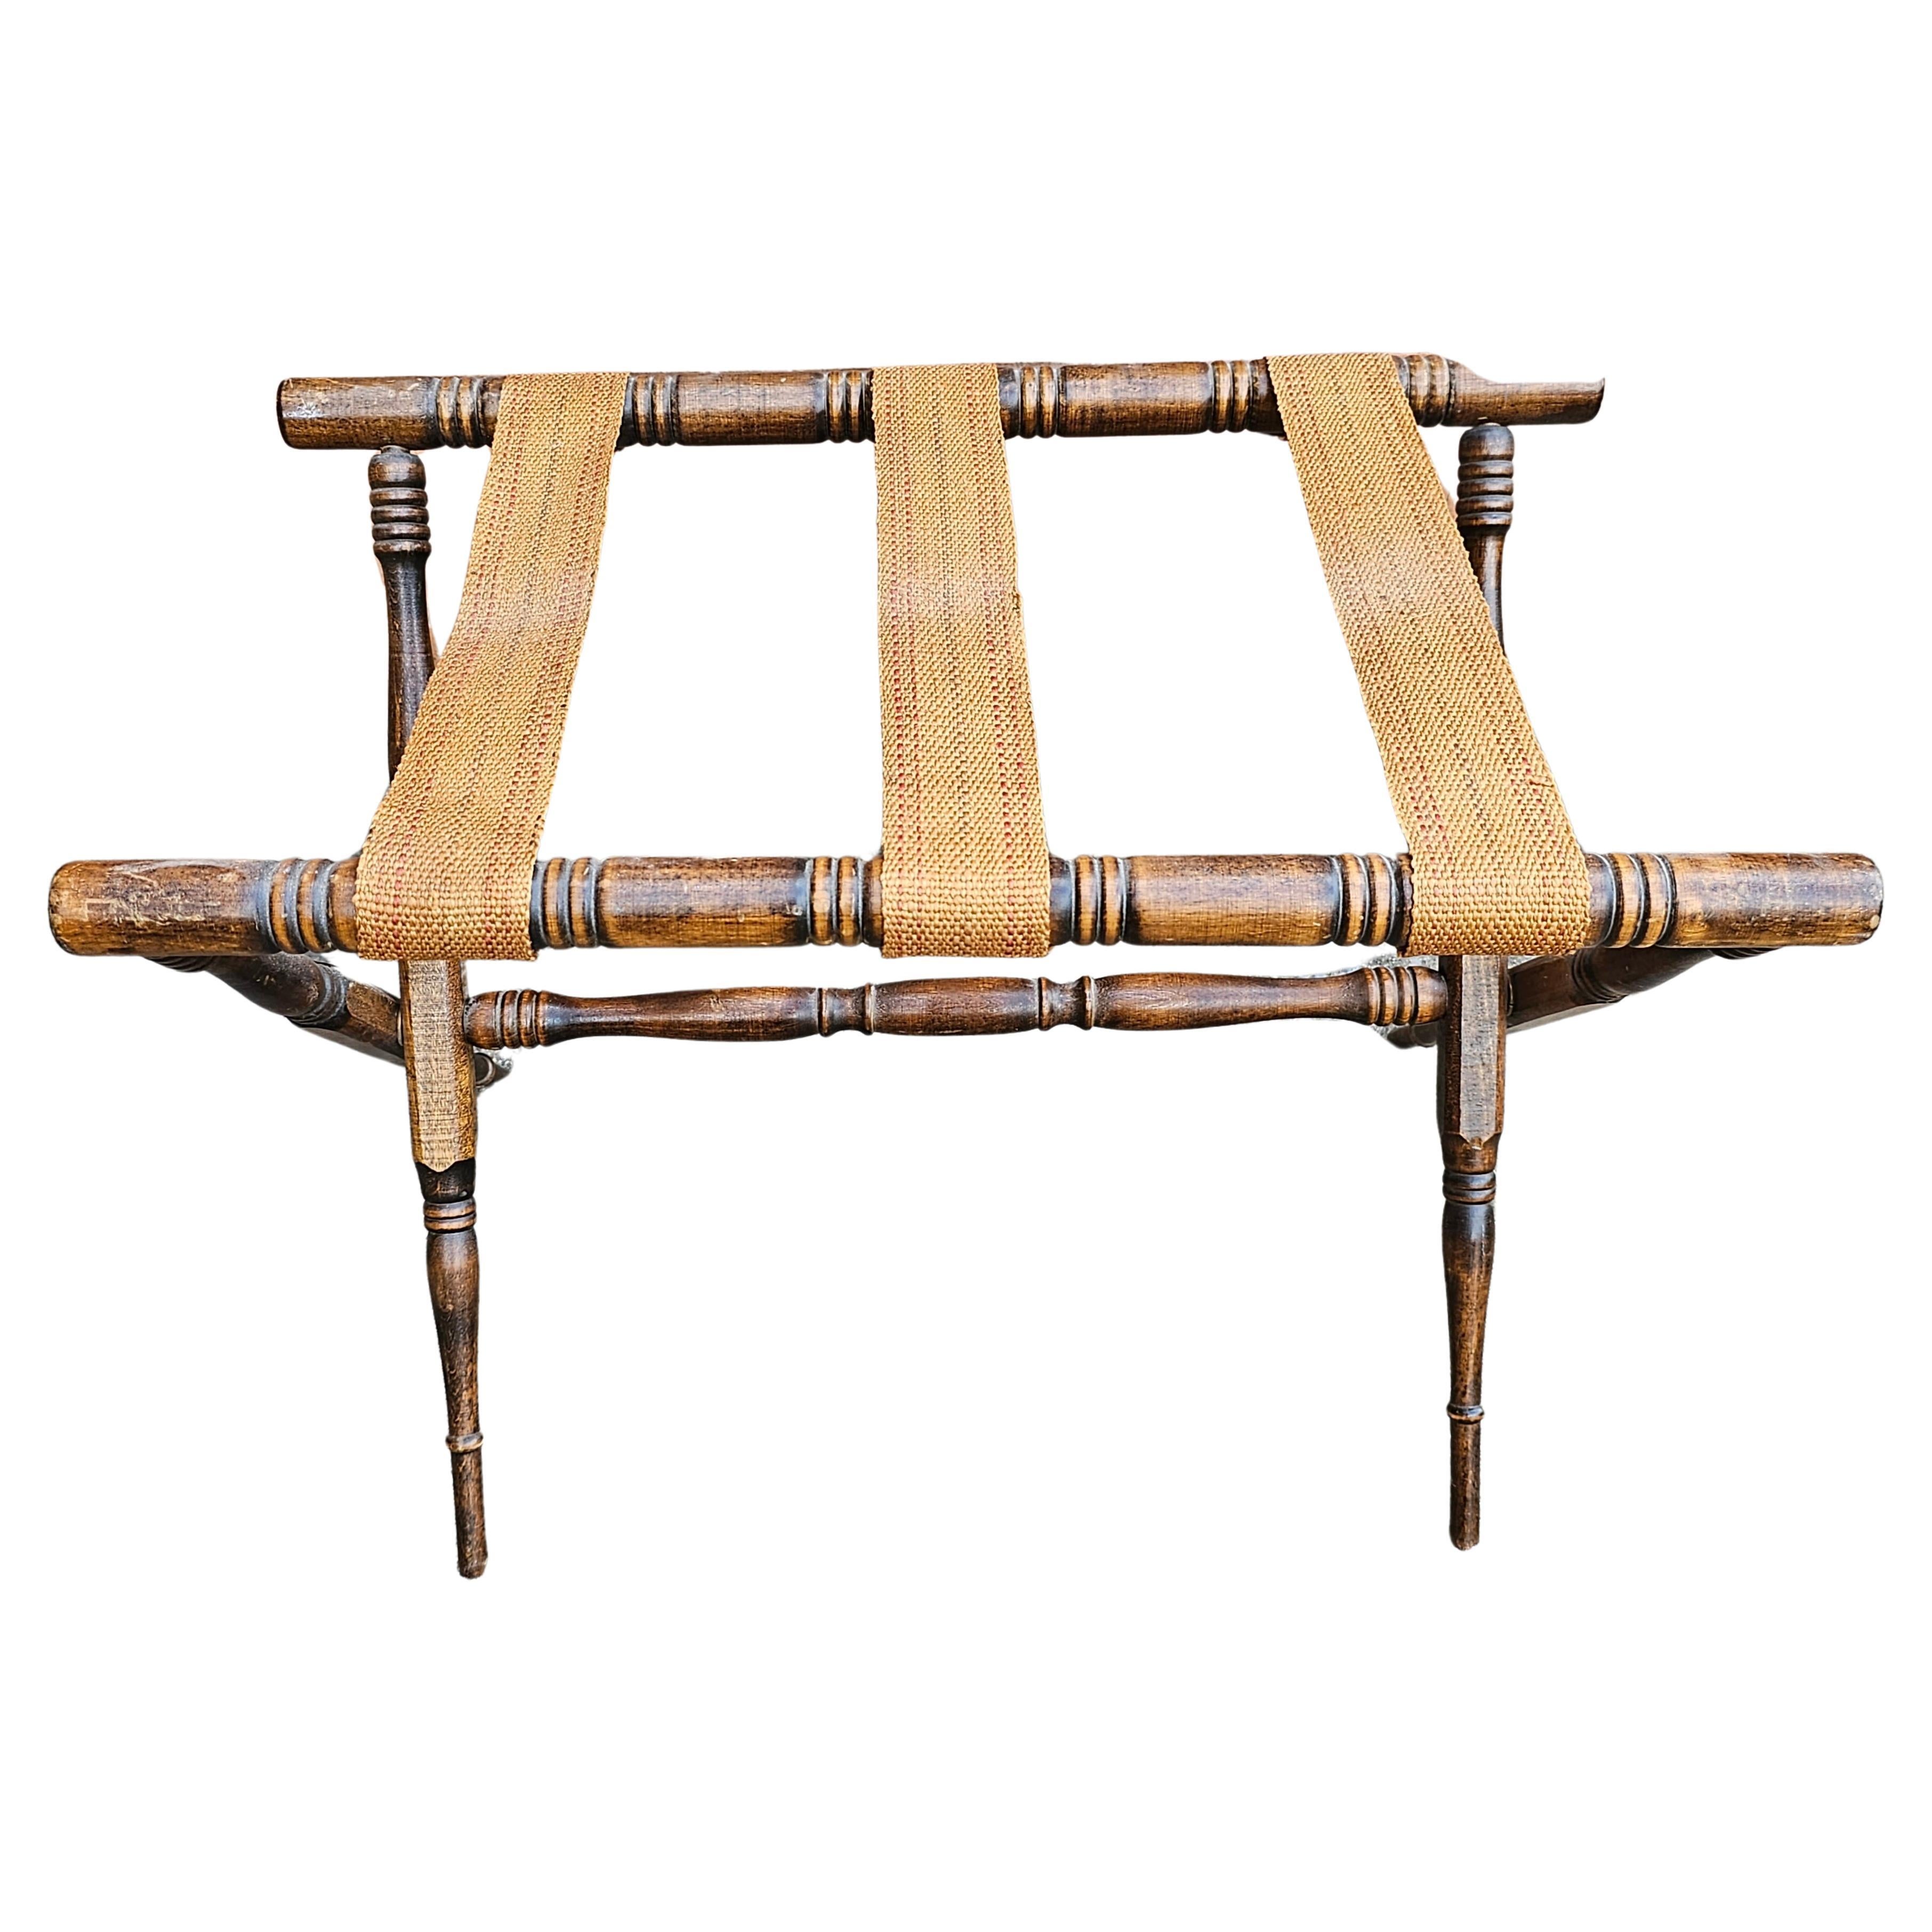 A Mid-Century Walnut Faux Bamboo spindle Luggage or Serving Tray Rack and Stand. Folds for easy storage. 